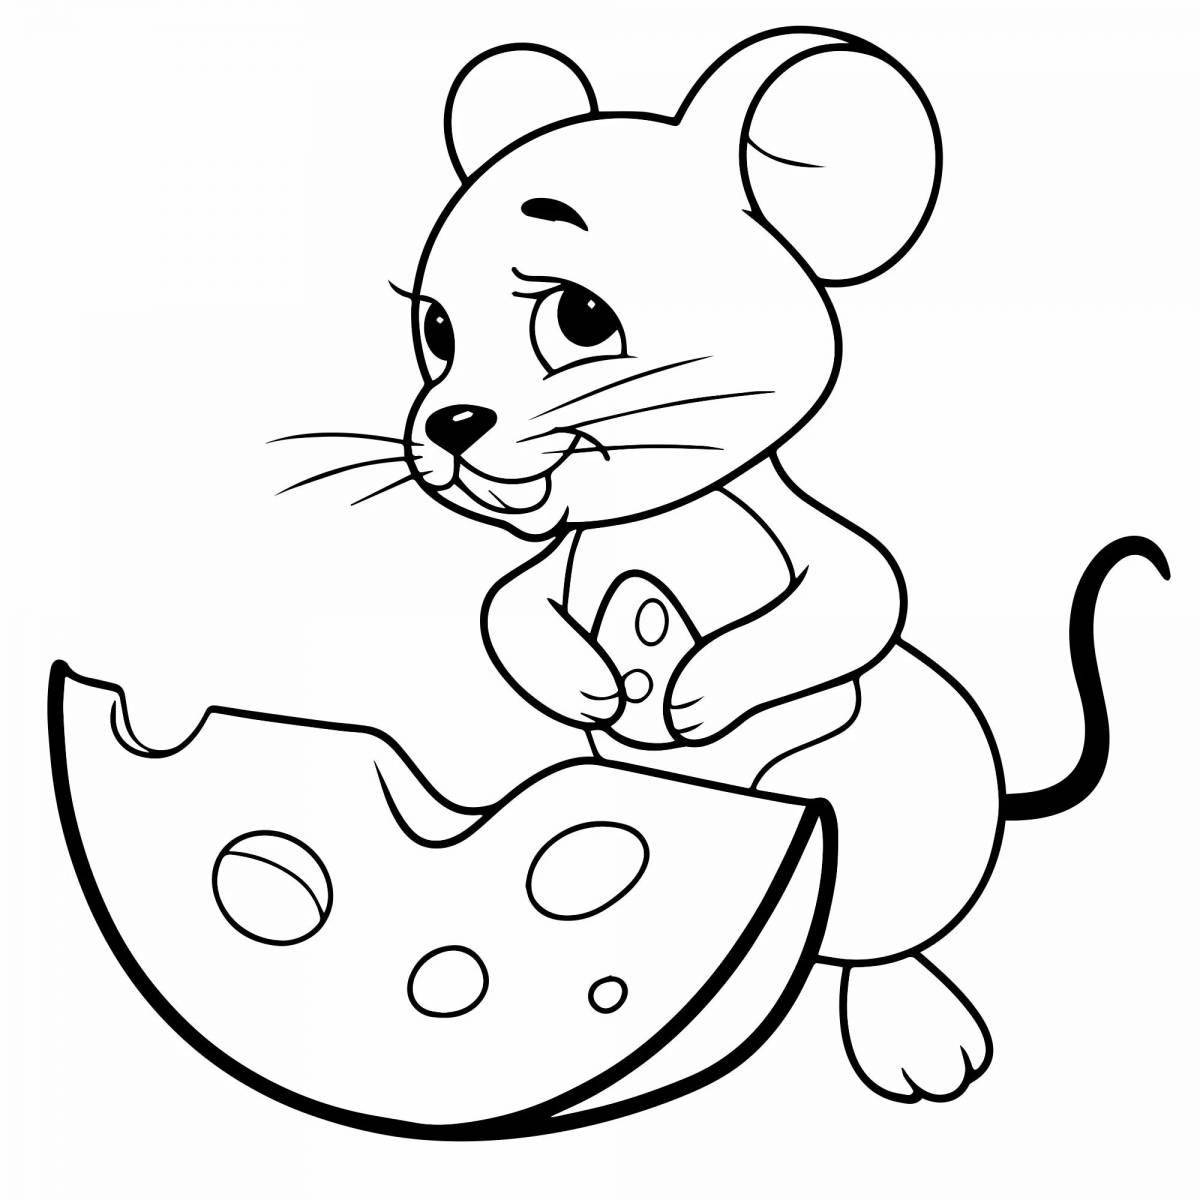 Fun coloring book with a mouse for 4-5 year olds